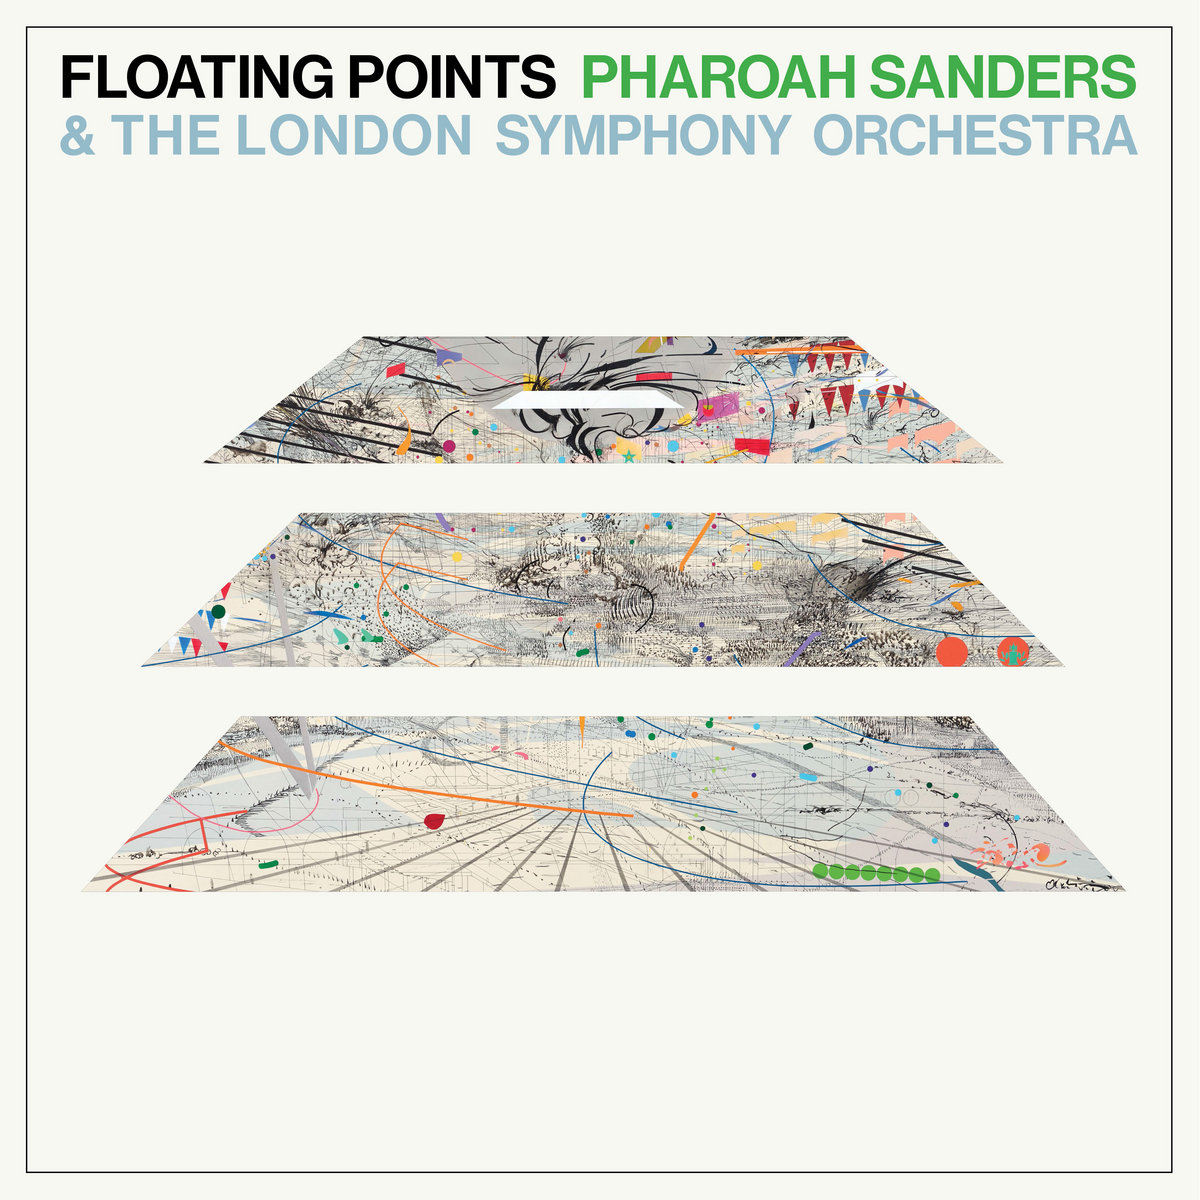 Promises by Floating Points and Pharoah Sanders